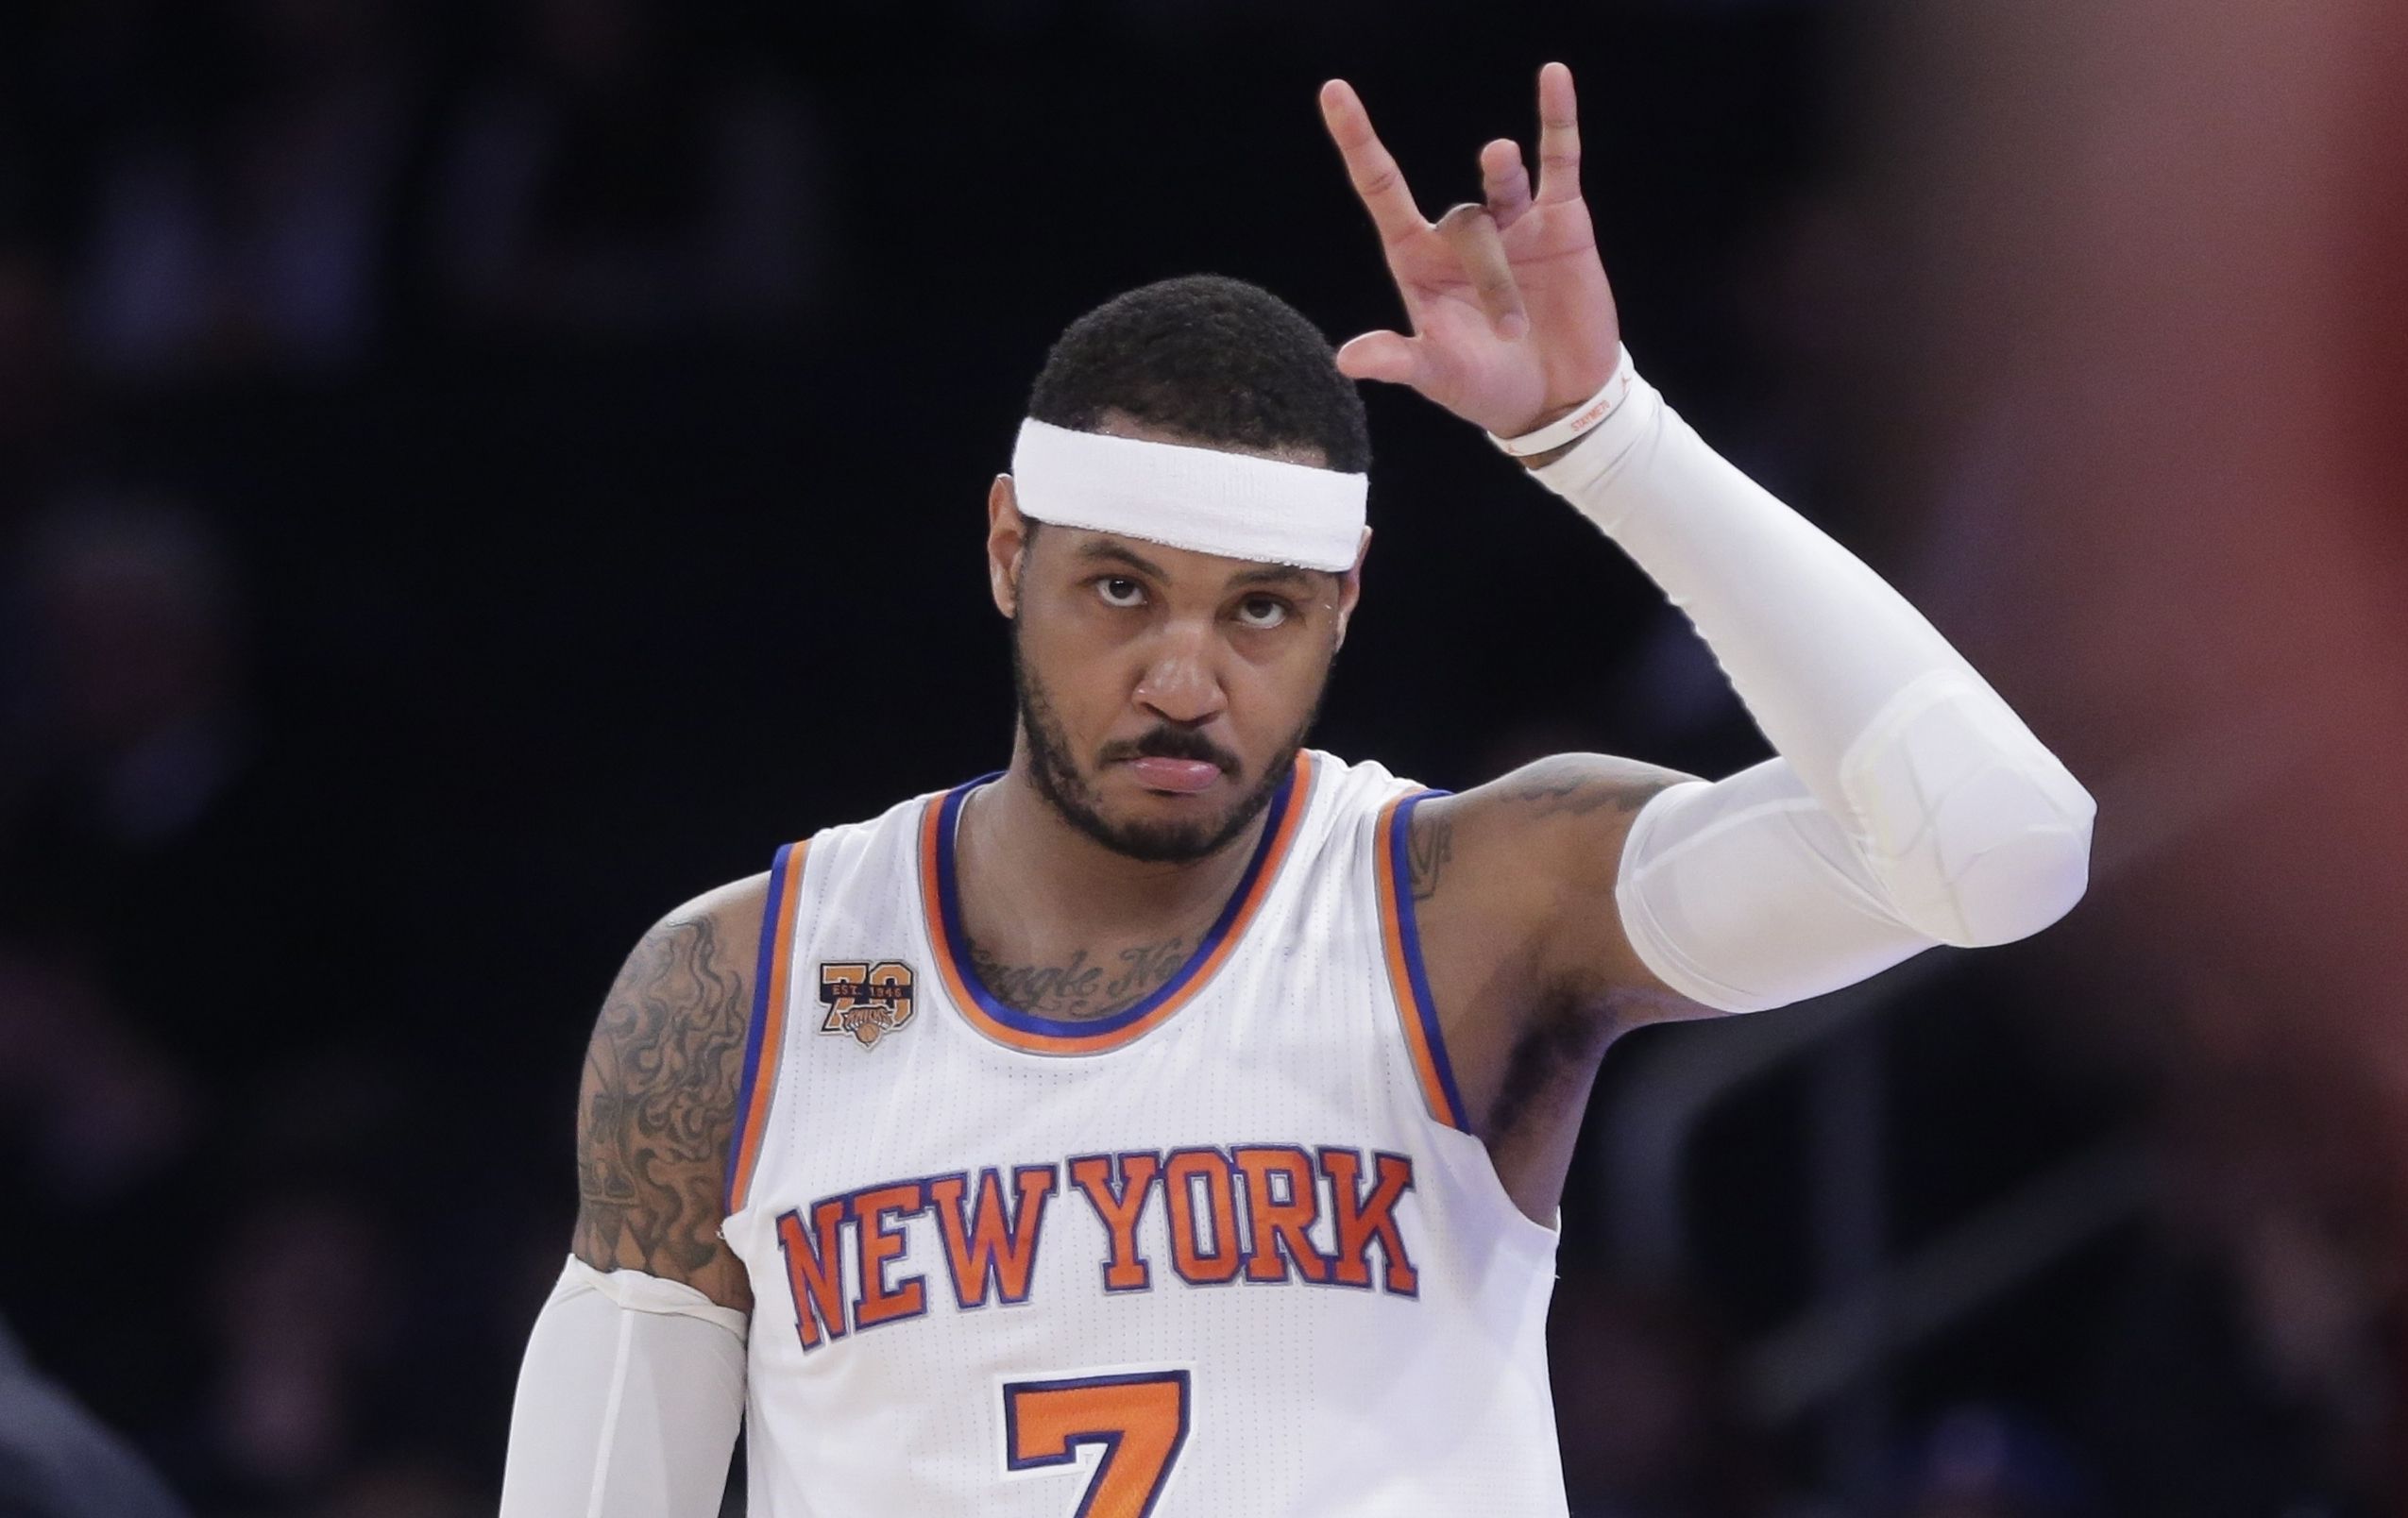 Photos: Carmelo Anthony may play his last game for the Knicks